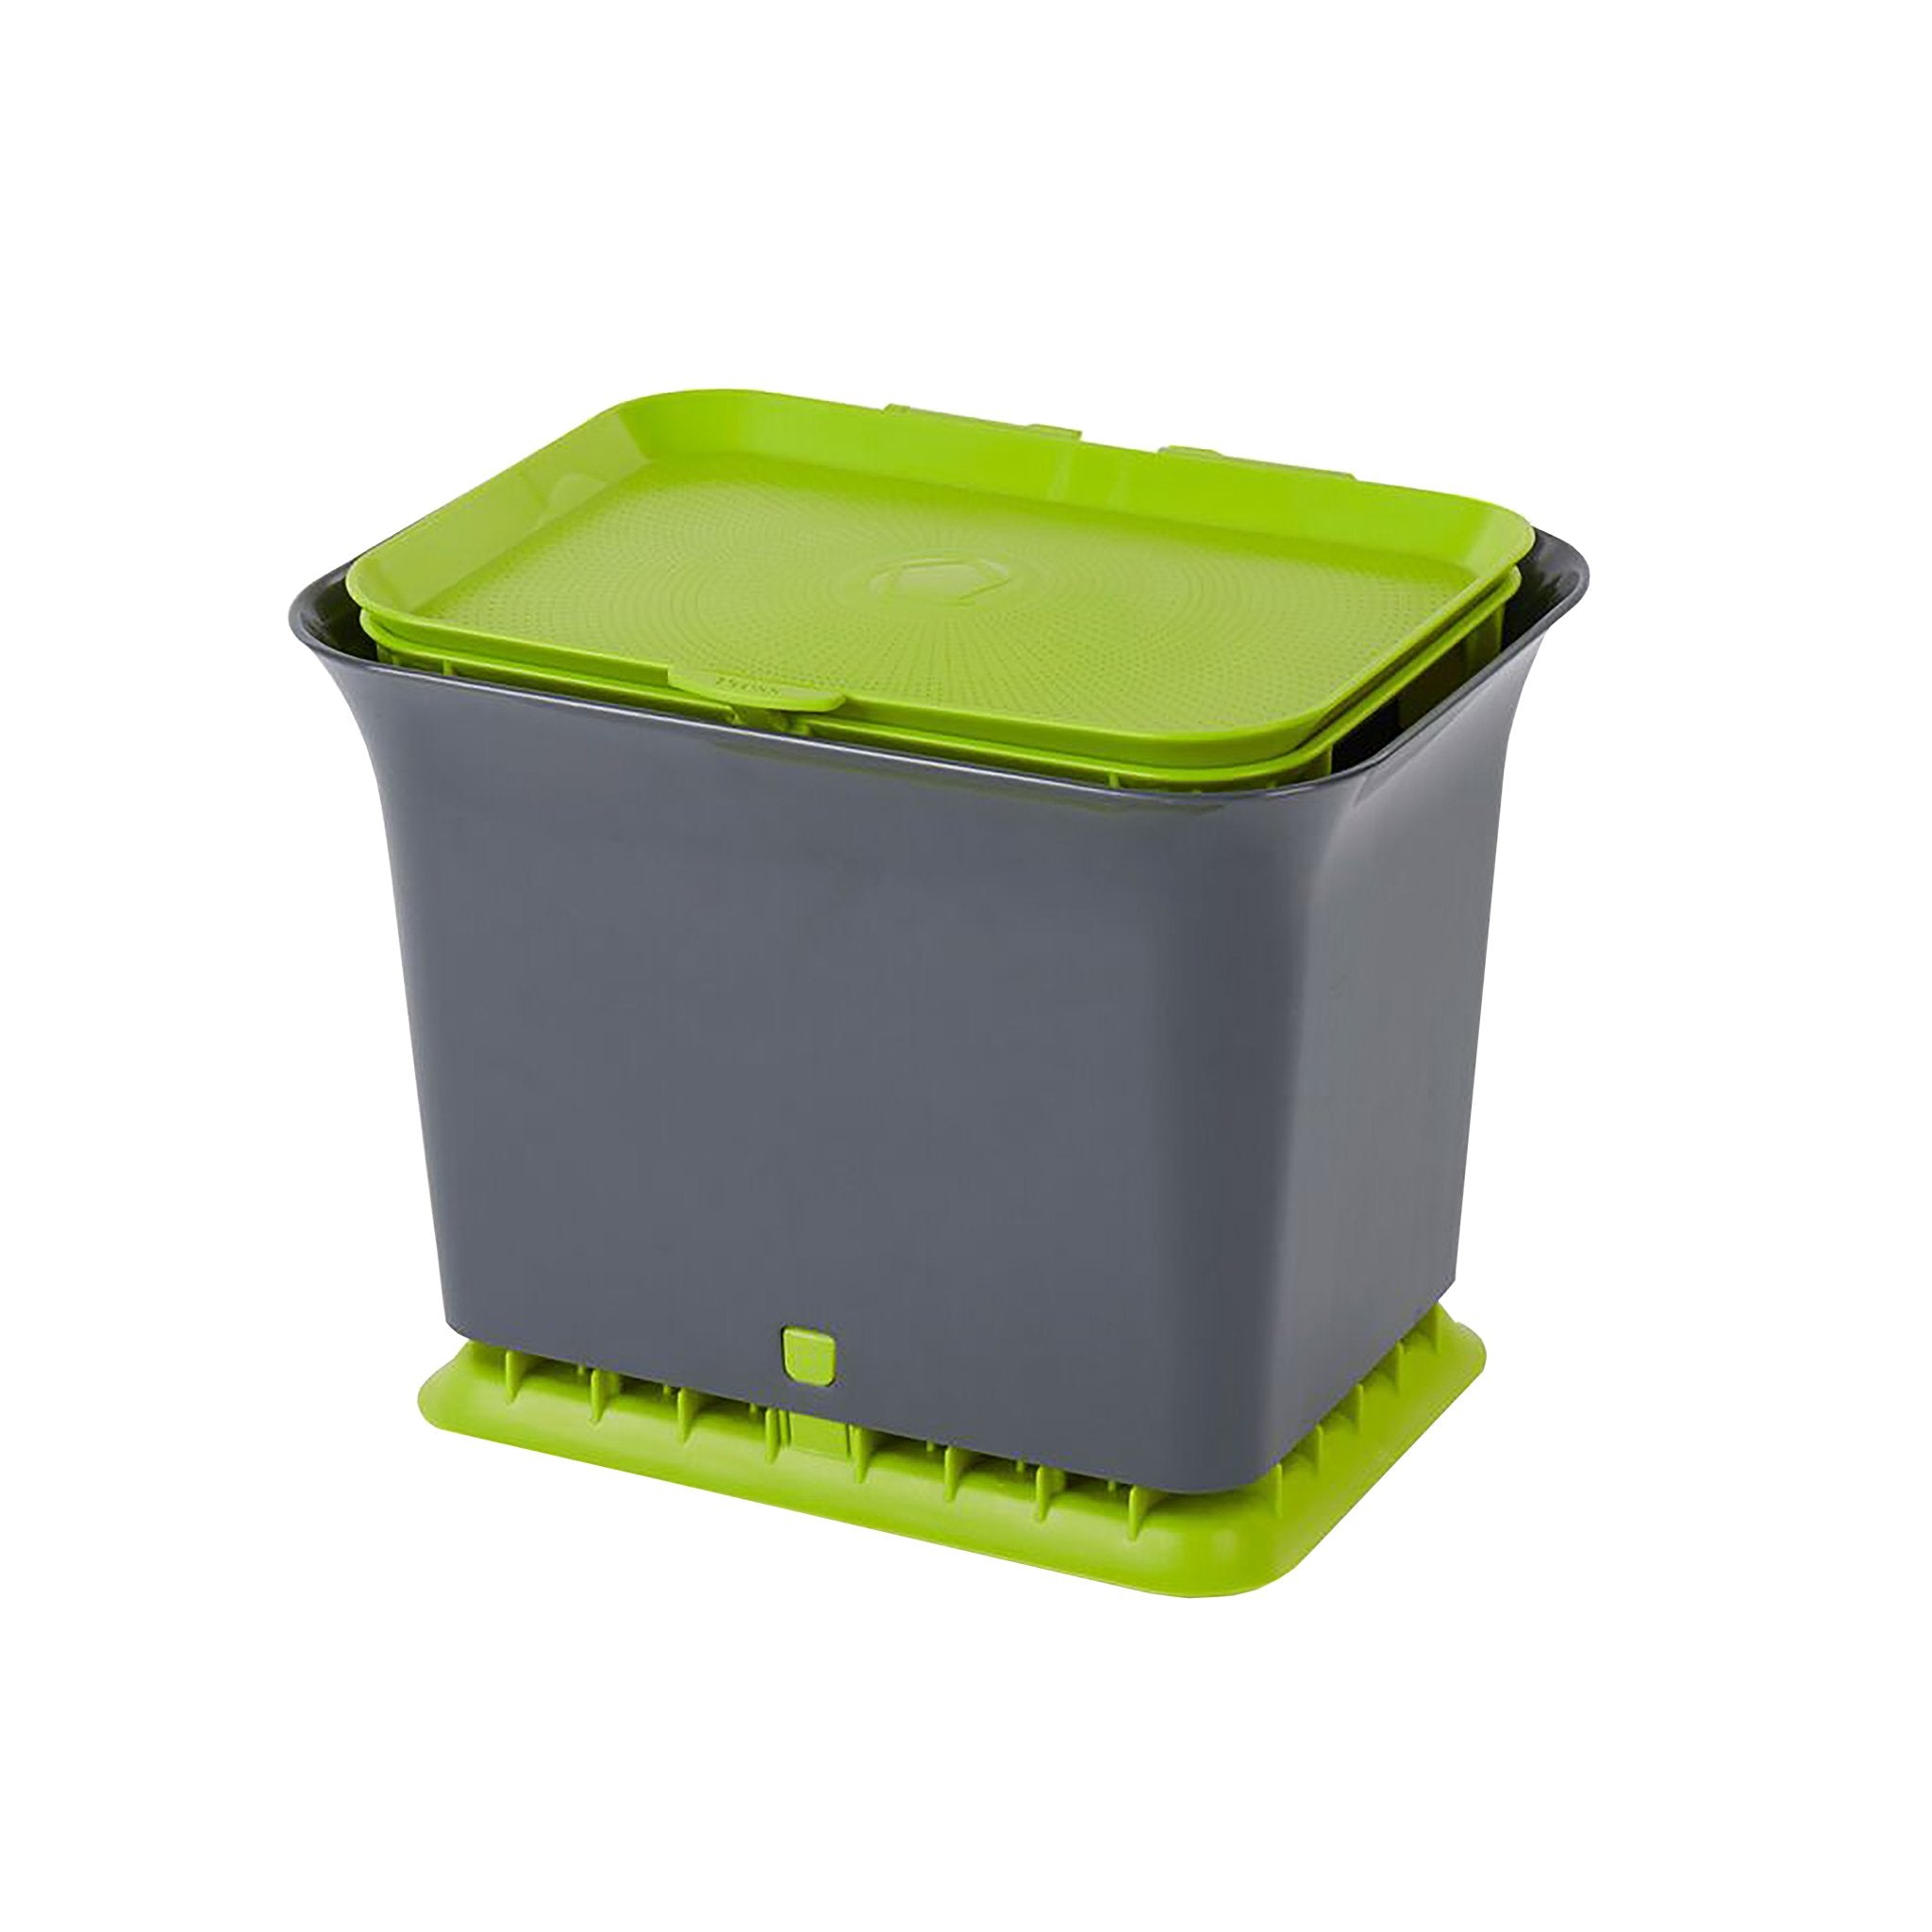 The Relaxed Gardener Kitchen Compost Bin 0.8 Gallon - Rust Proof and Leak Proof